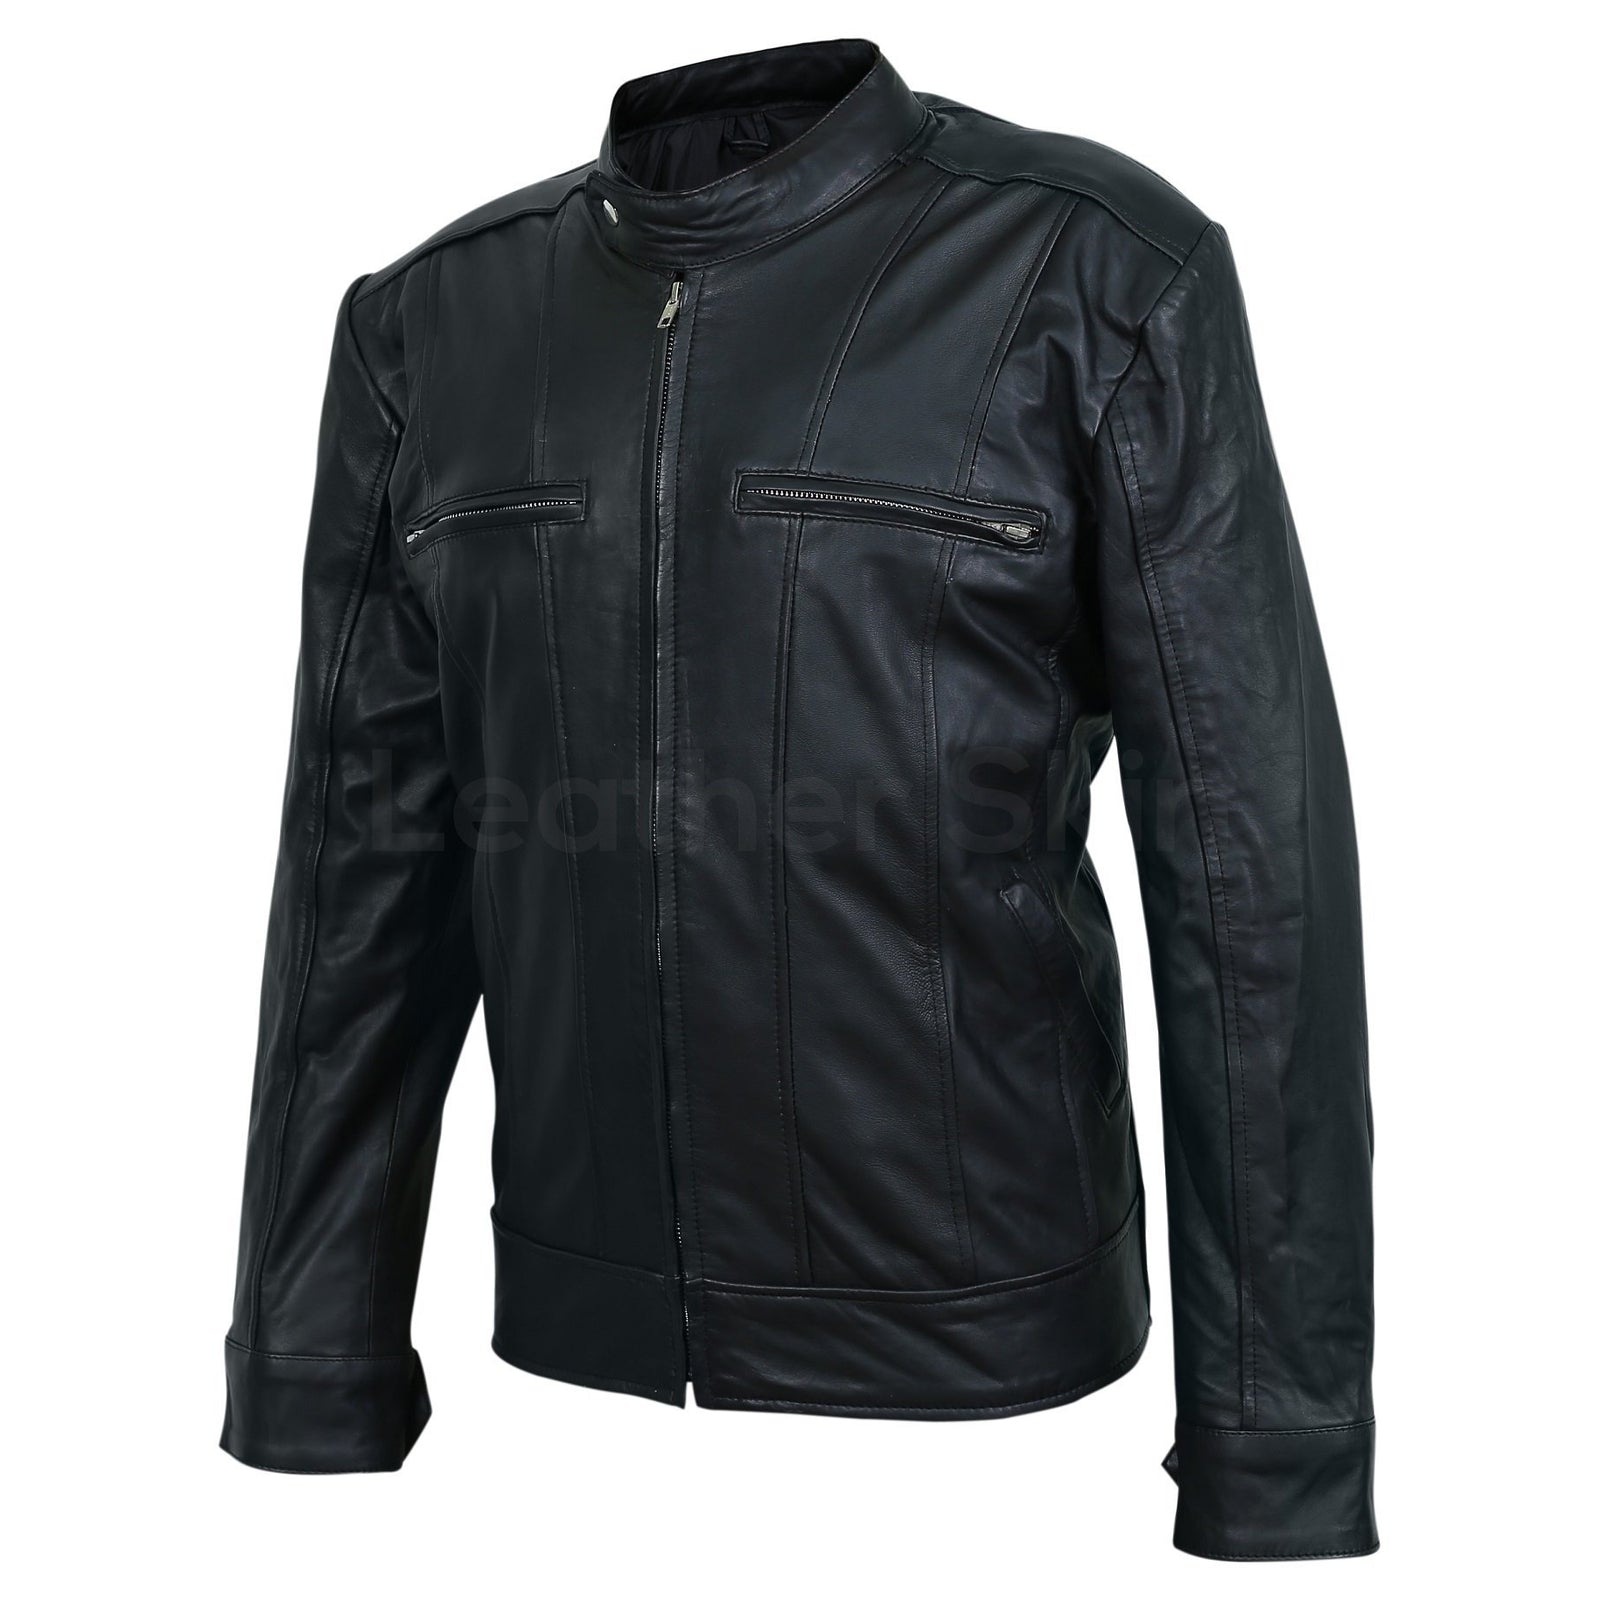 Men Red Genuine Leather Jacket with Black Diamond Quilted Shoulders -  Leather Skin Shop